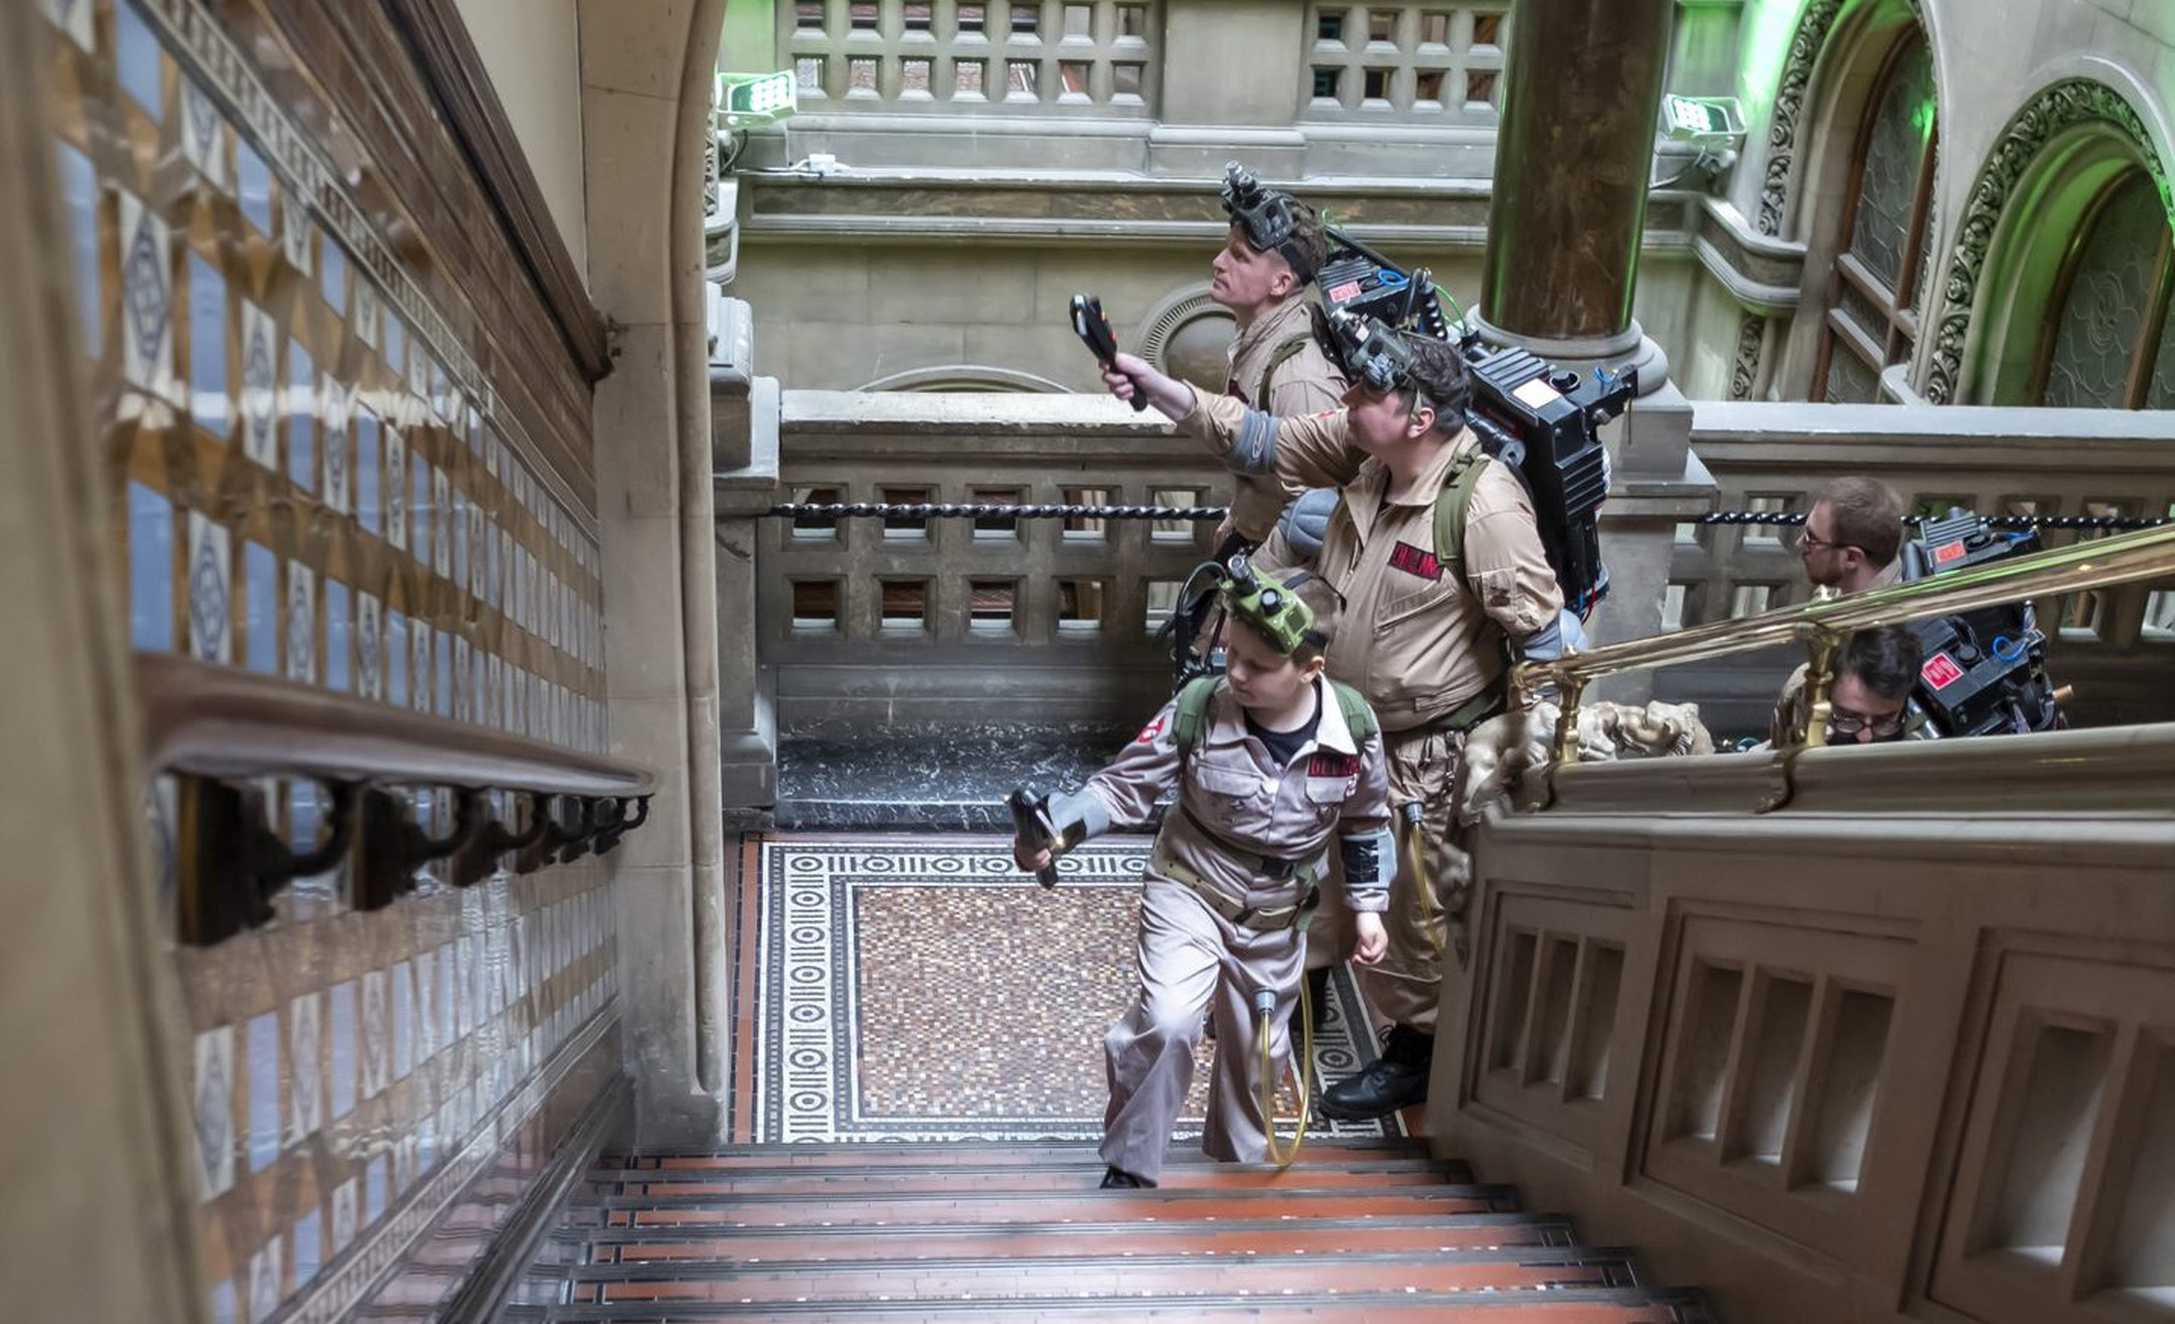 George and his fellow Ghostbusters ascending the grand staircase at Leeds Library.